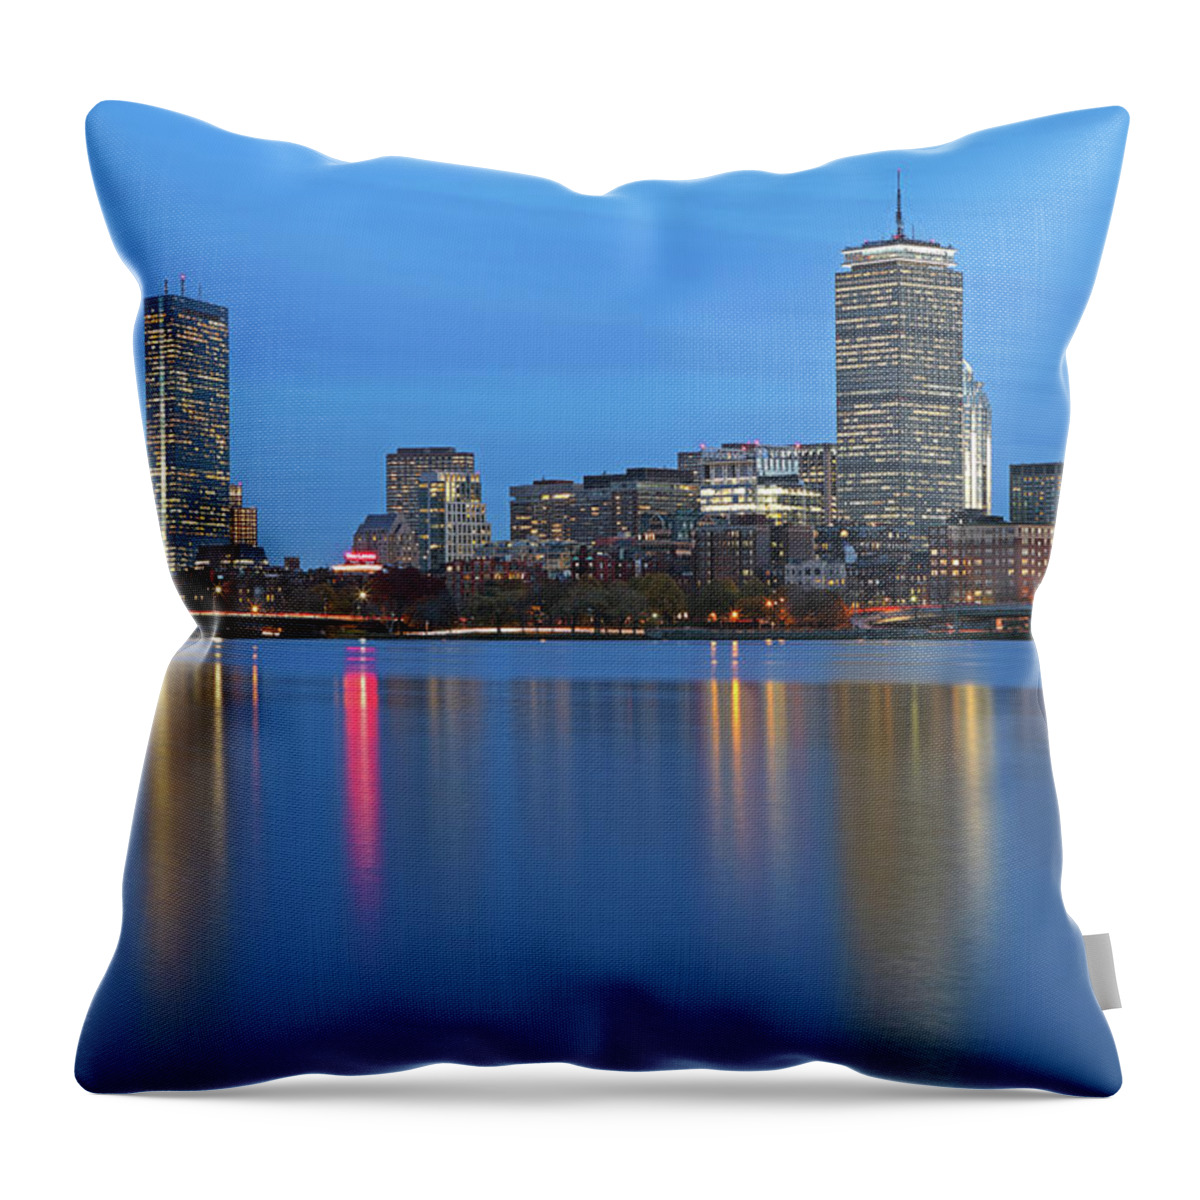 Boston Throw Pillow featuring the photograph Familiar Boston Landmarks by Juergen Roth